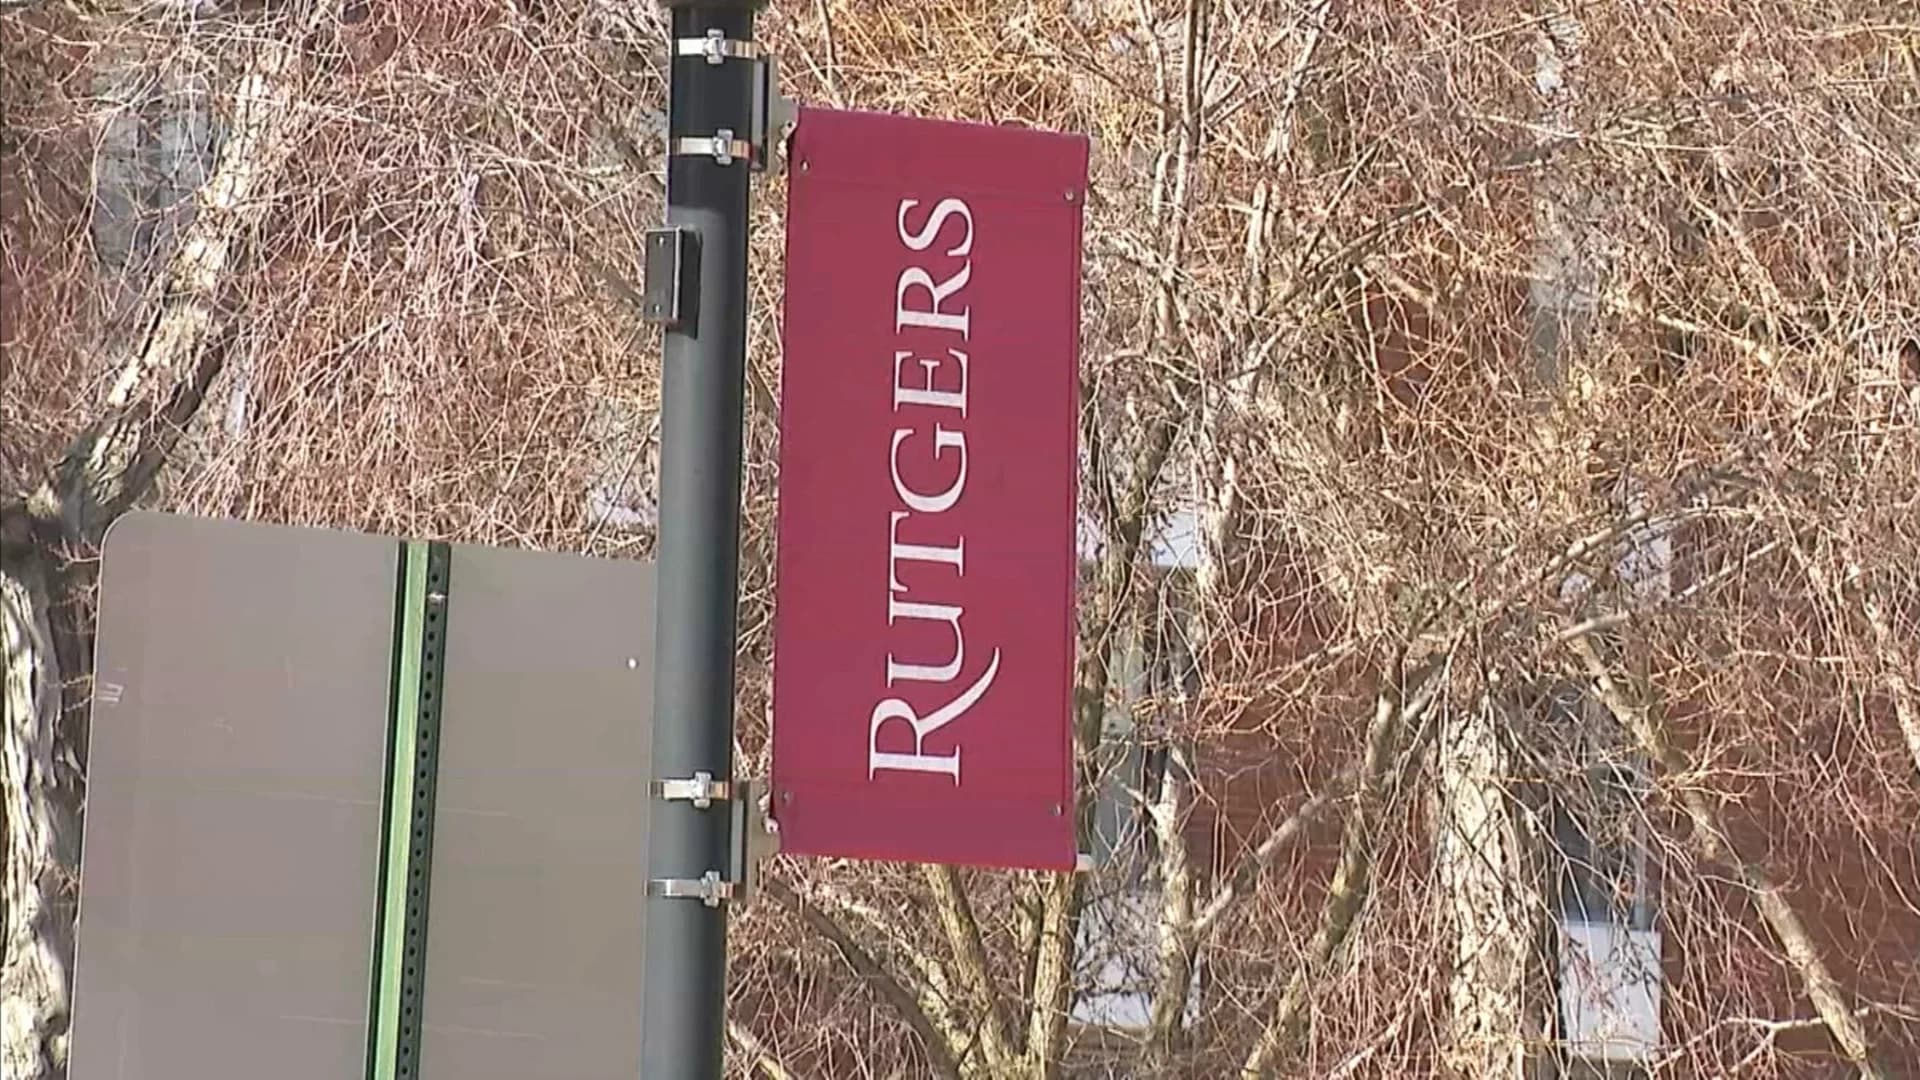 Faculty at Rutgers University prepare for possible strike